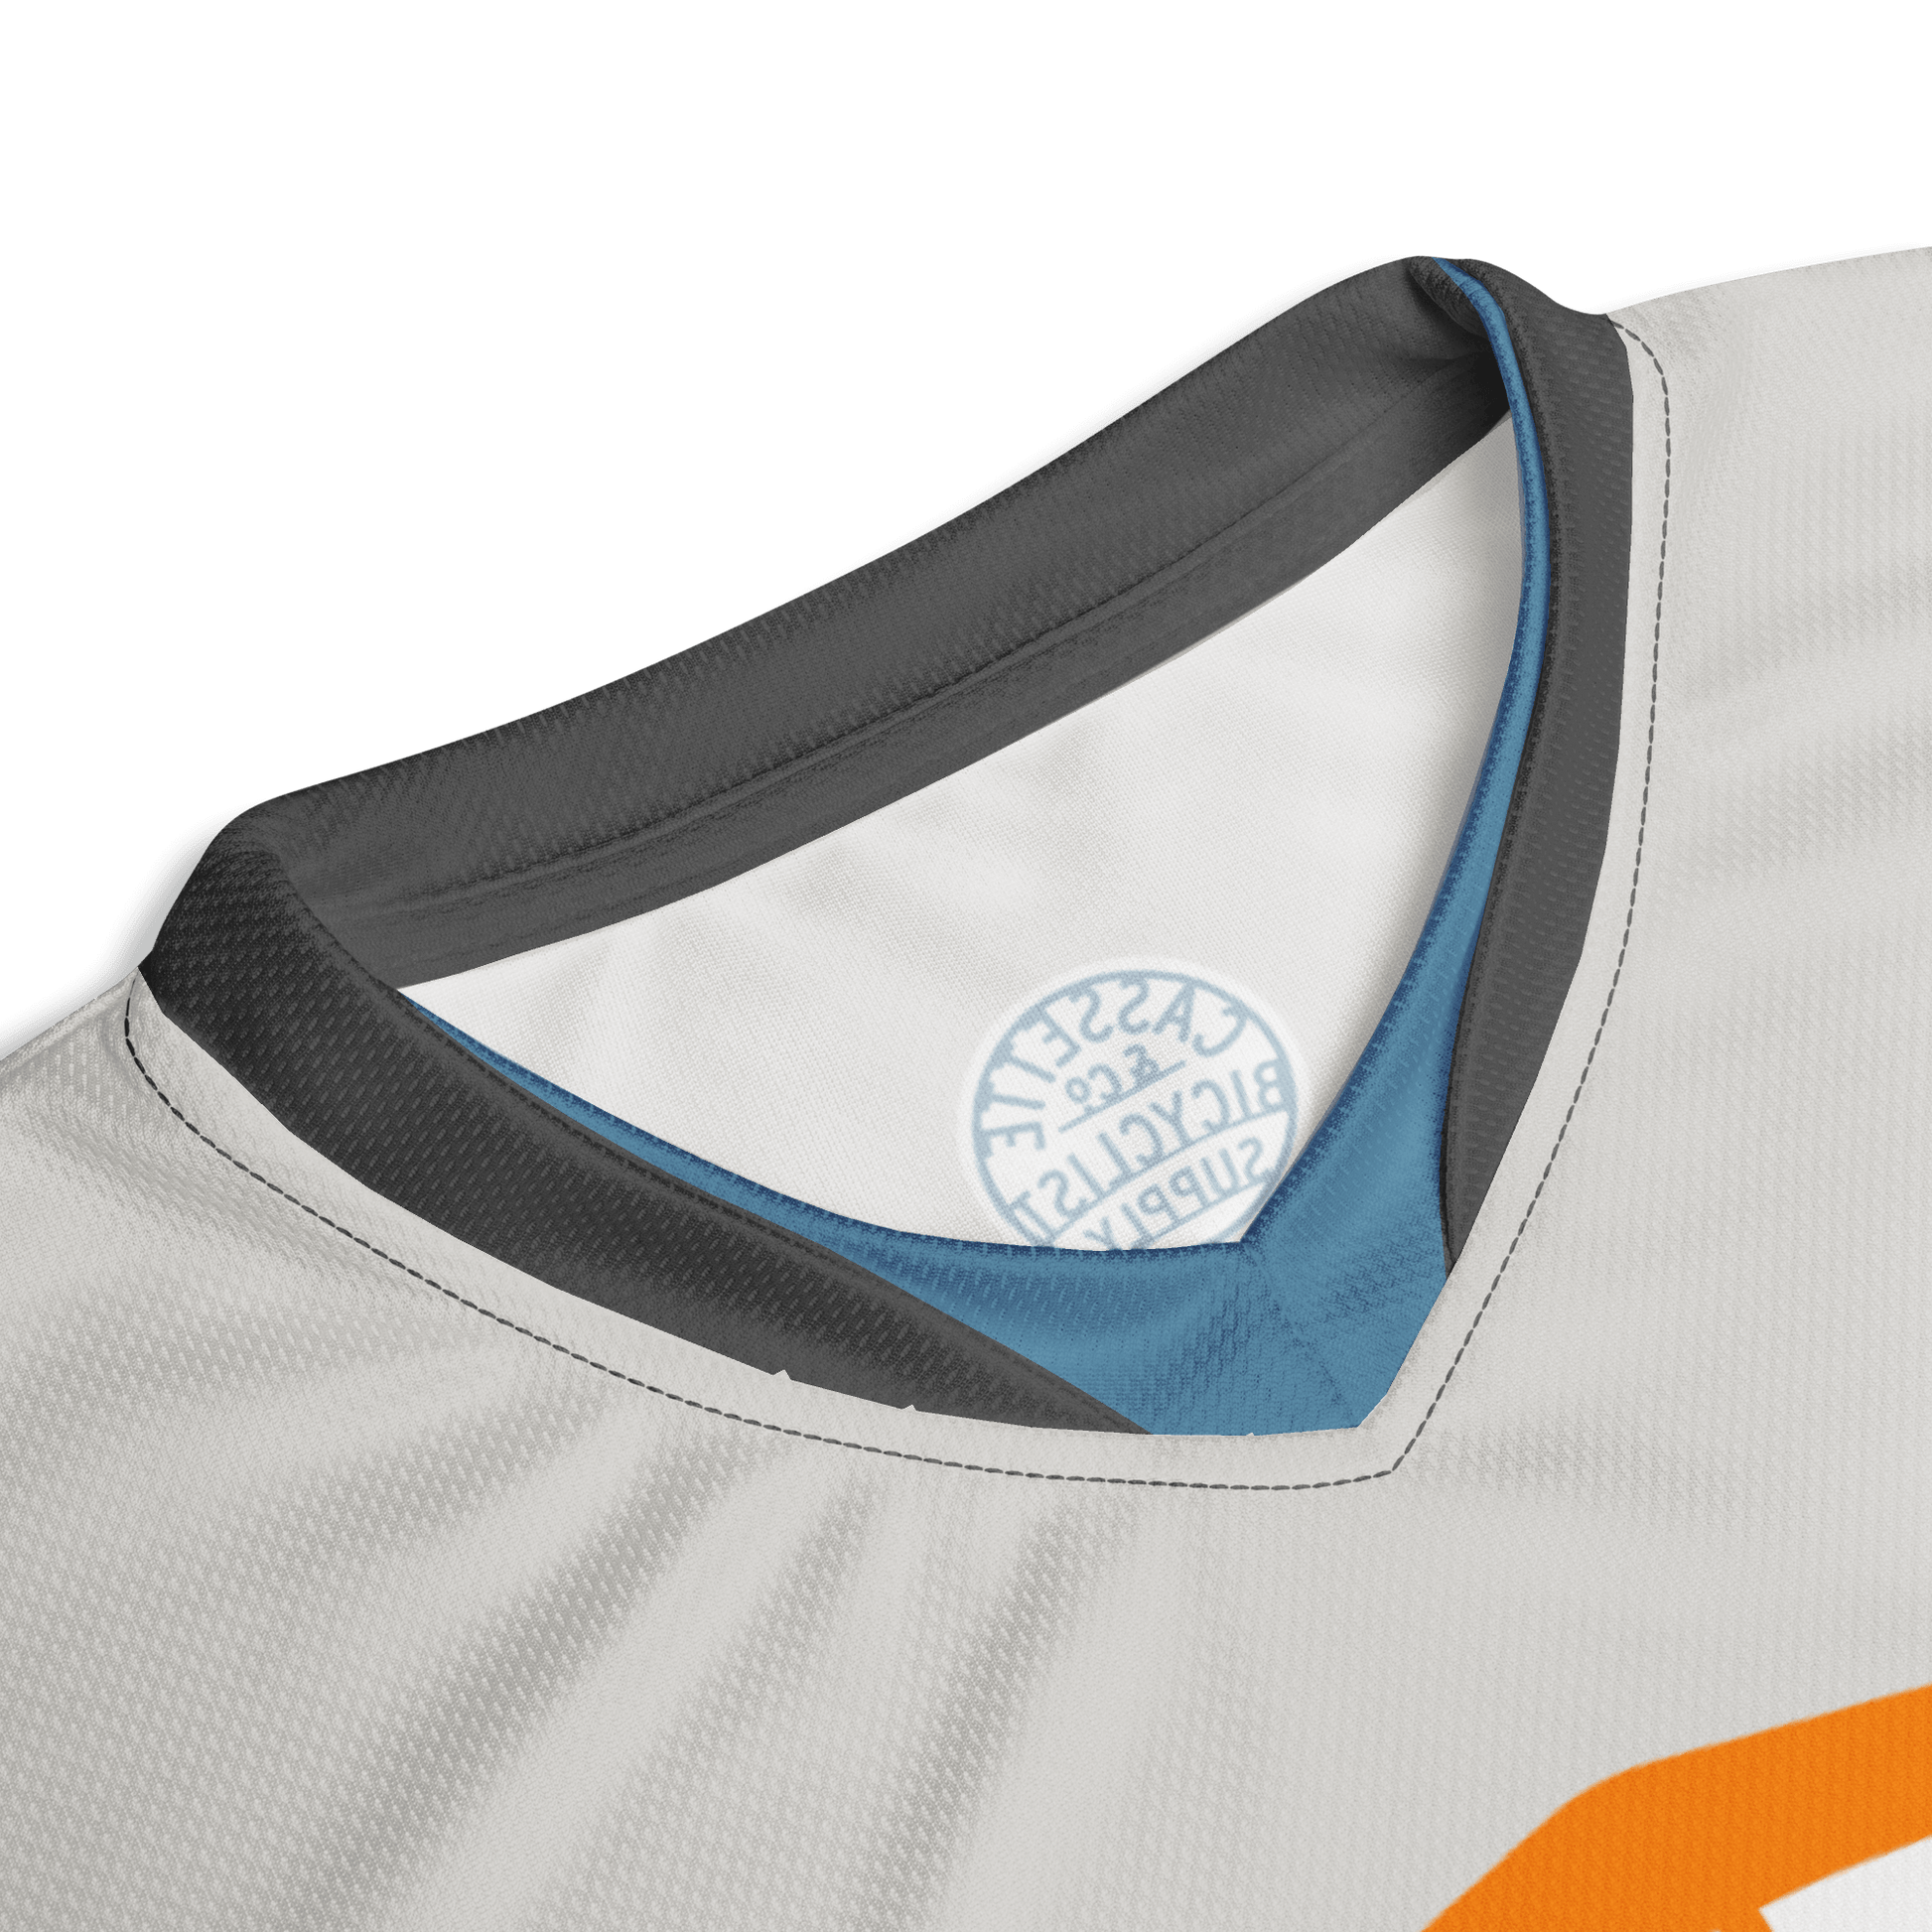 collar detail of the 3 stripe jersey